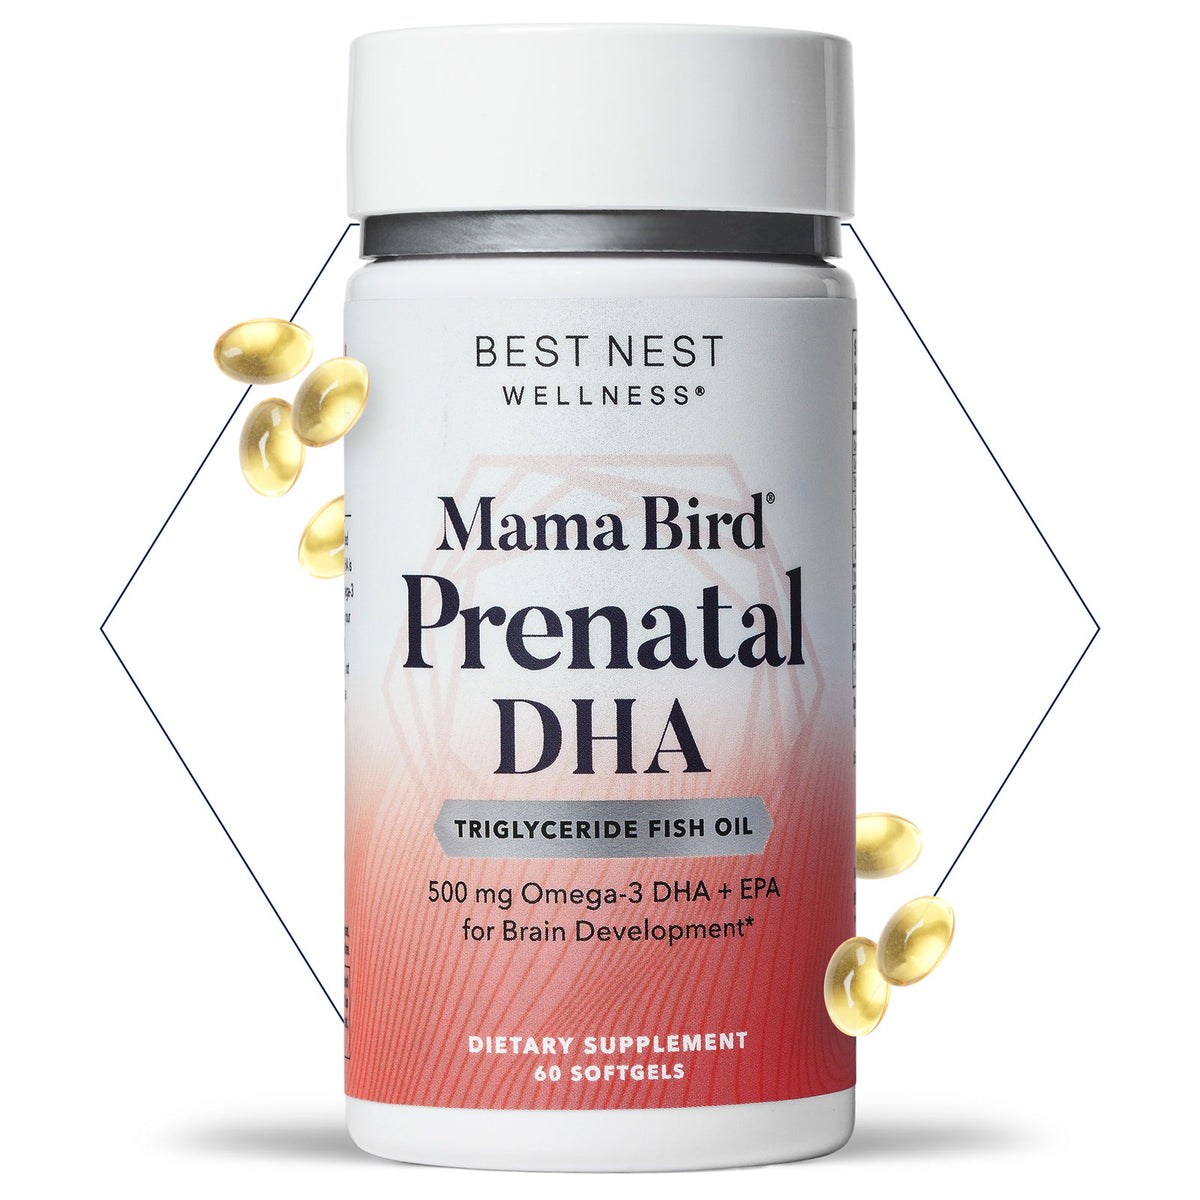 Mama Bird Prenatal DHA bottle with label, close-up details of the product for neurodevelopment support.